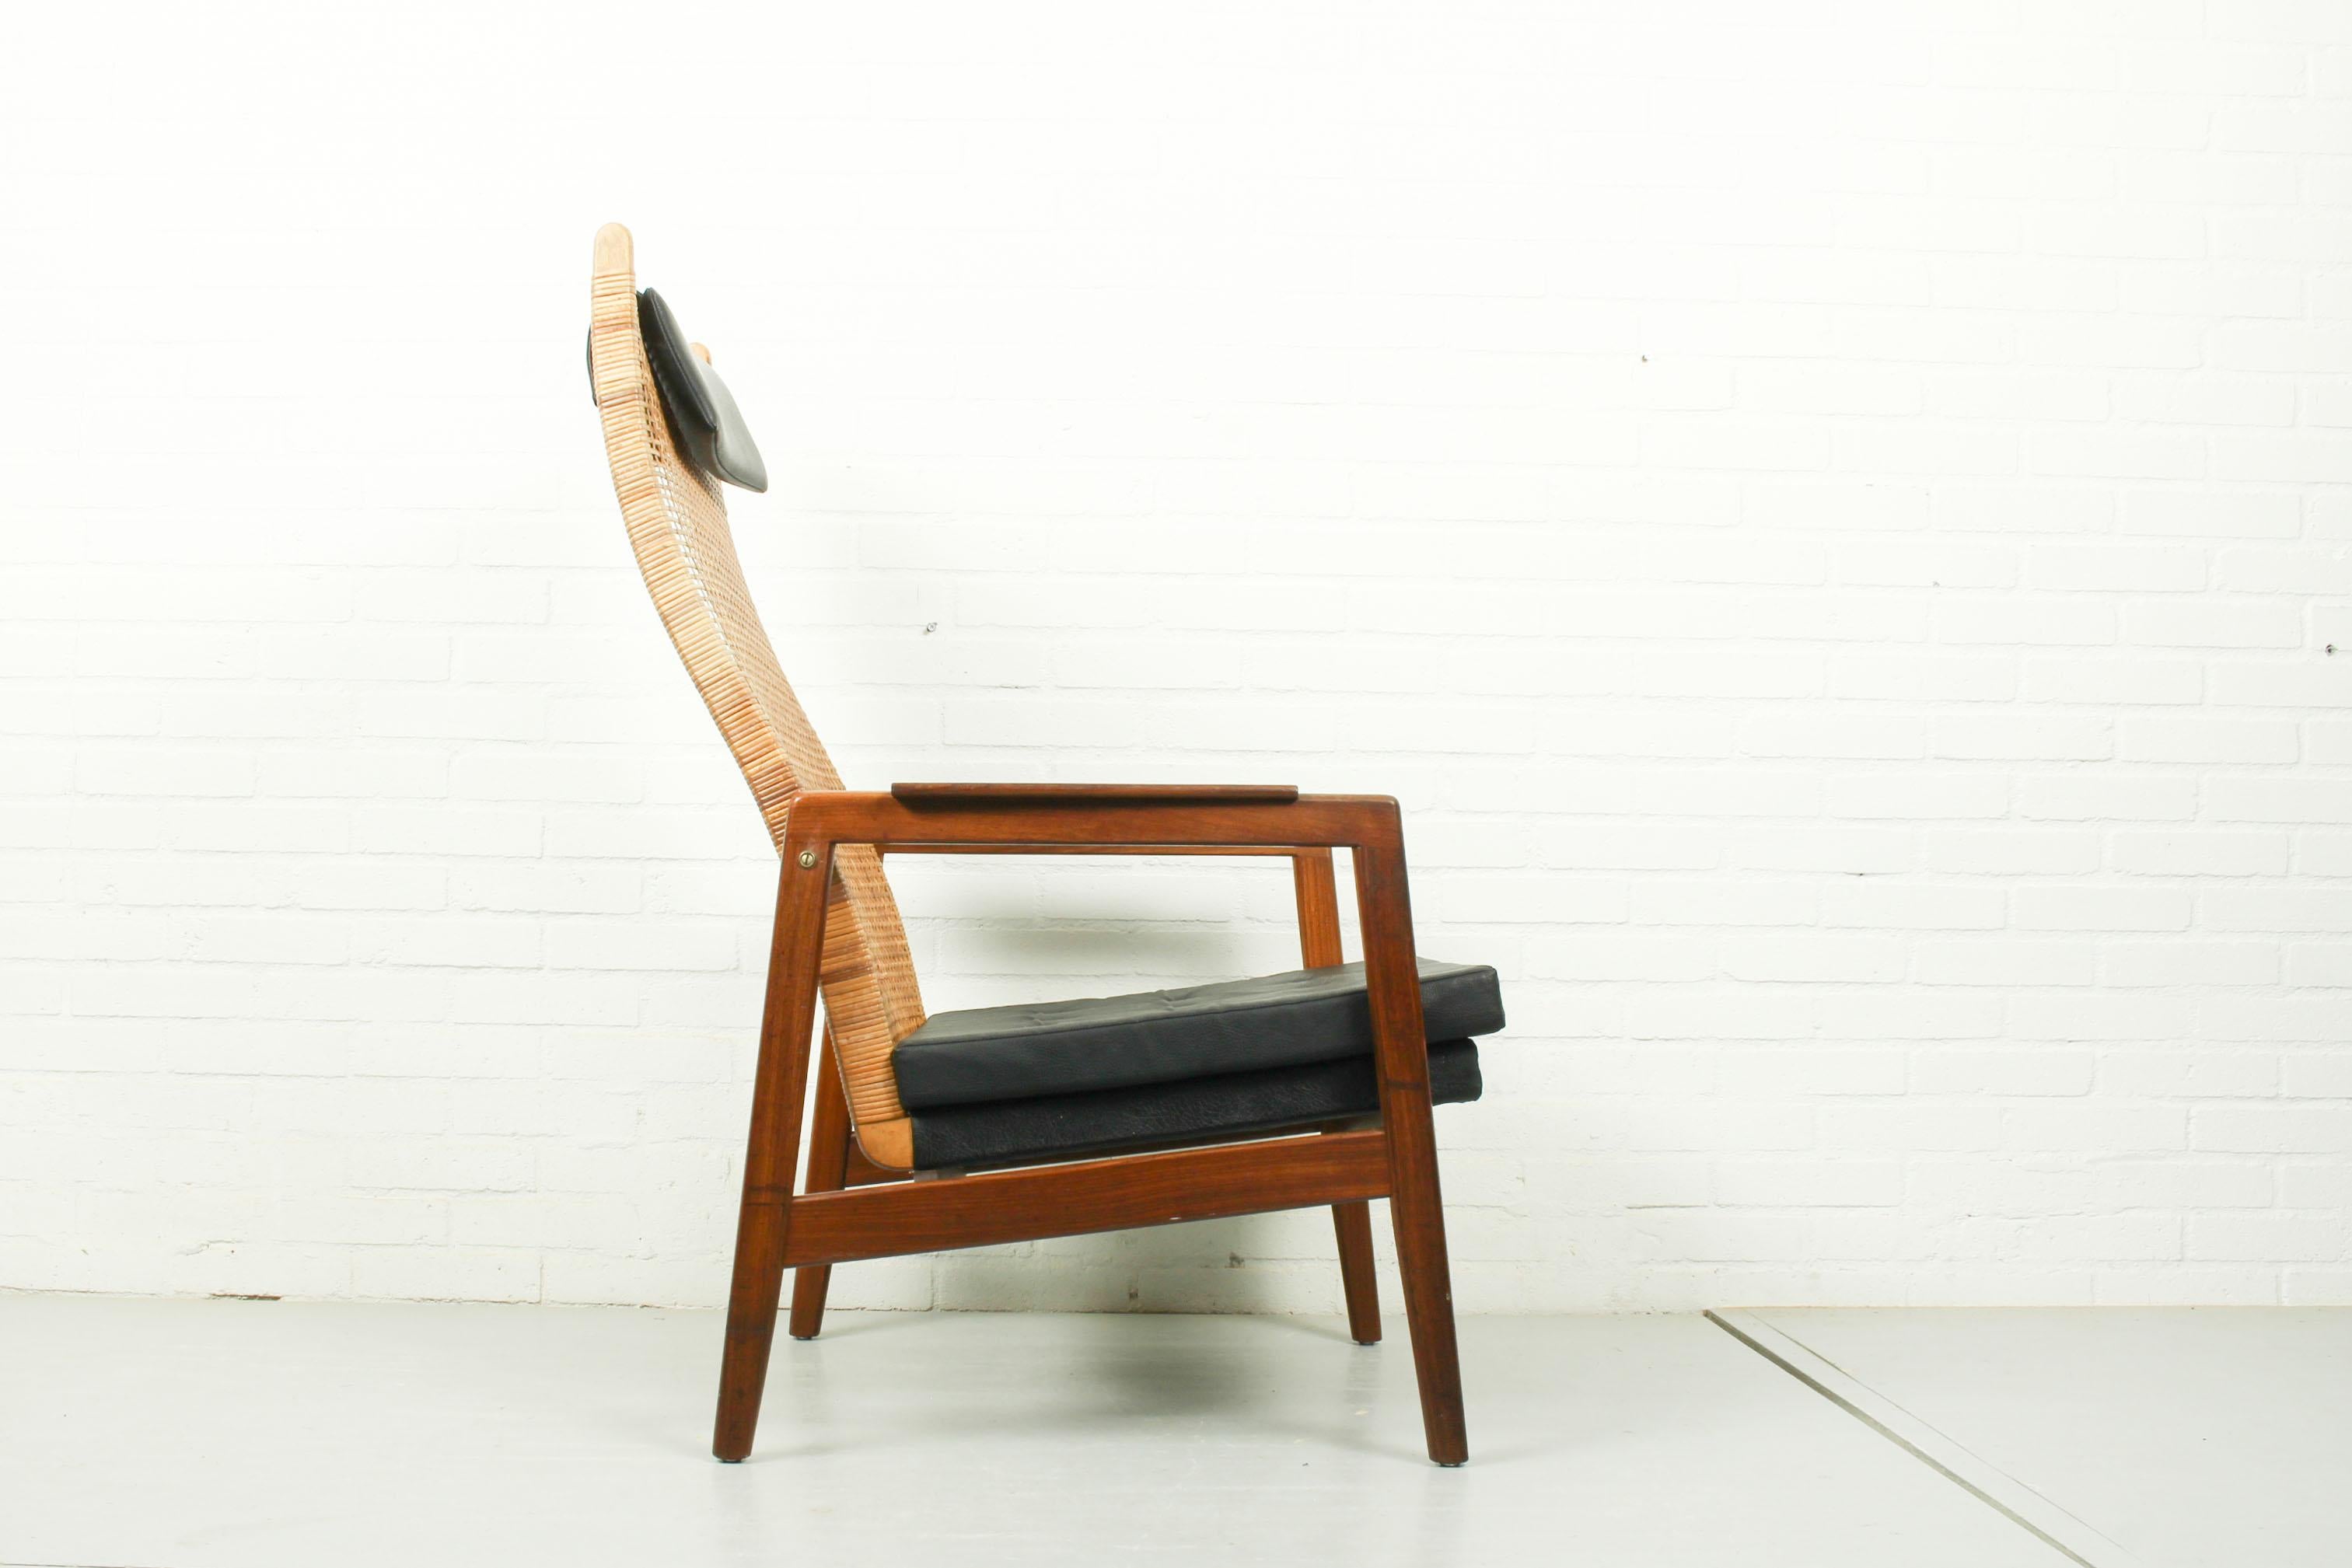 Lounge chair designed by Muntendam for Gebroeders Jonkers, 1960s. The chair has a teak frame, a webbed cane backrest and vinyl leather upholstery. It is fully original and overall in good vintage condition althought there seem to have been some